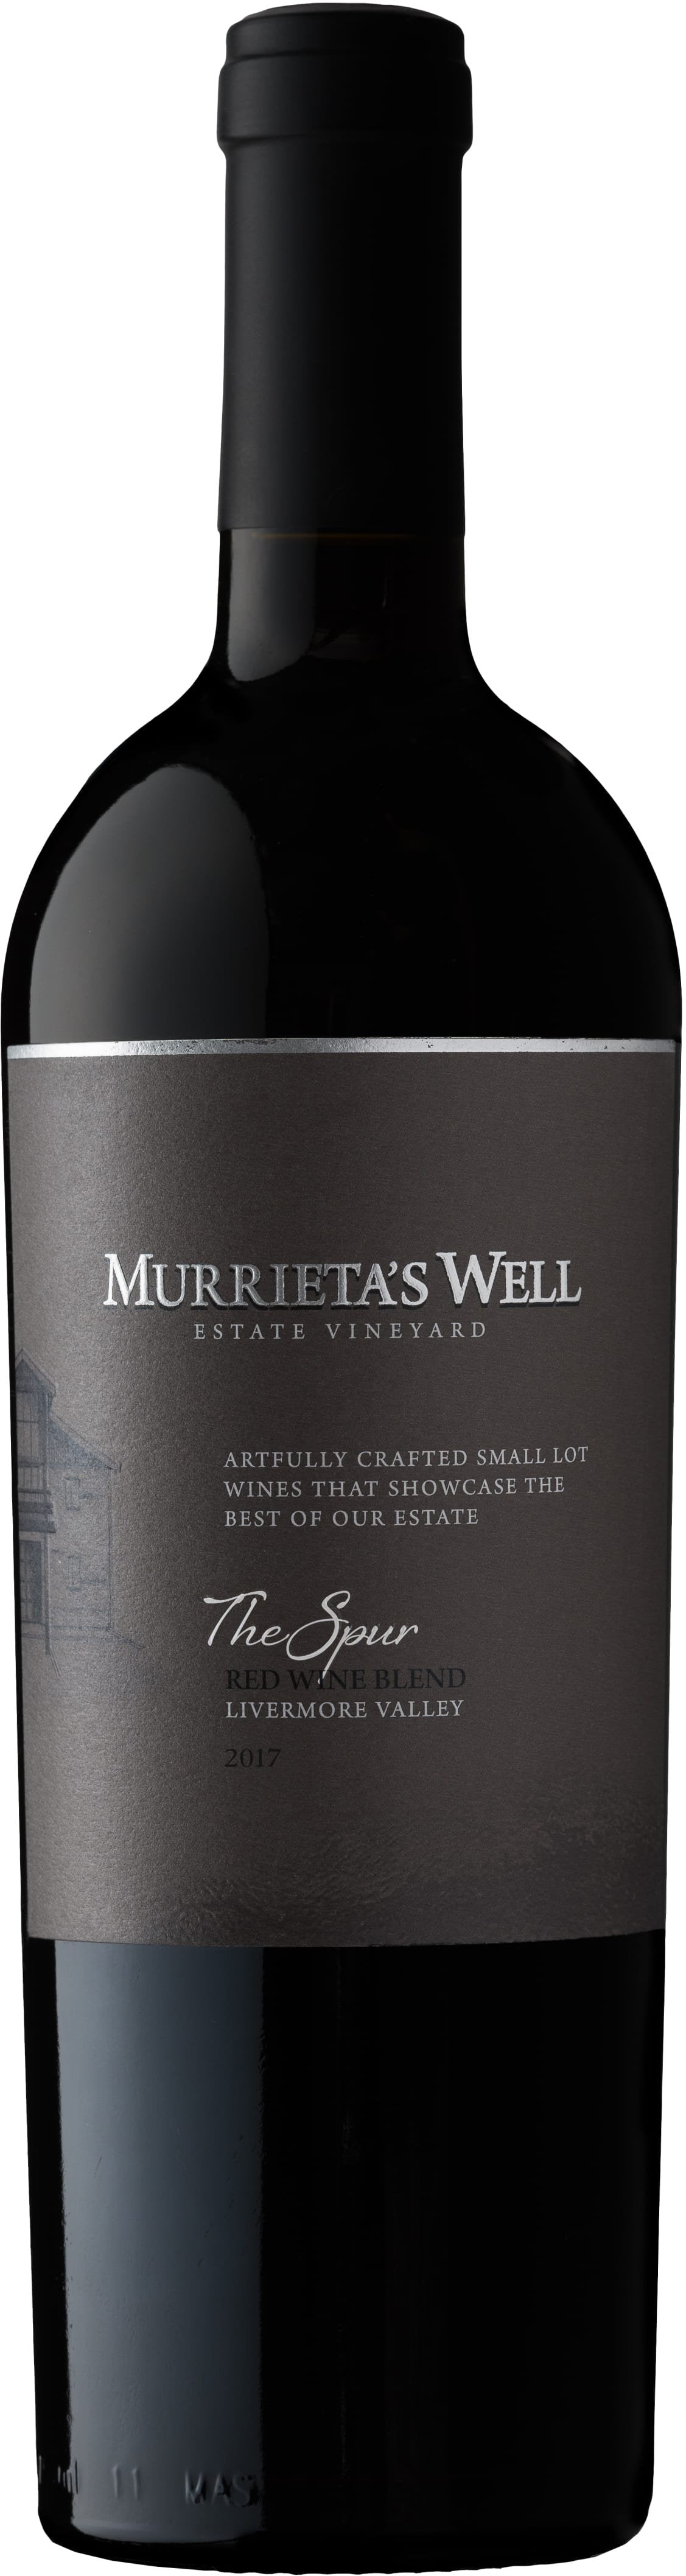 Murrieta's Well The Spur Red 2017